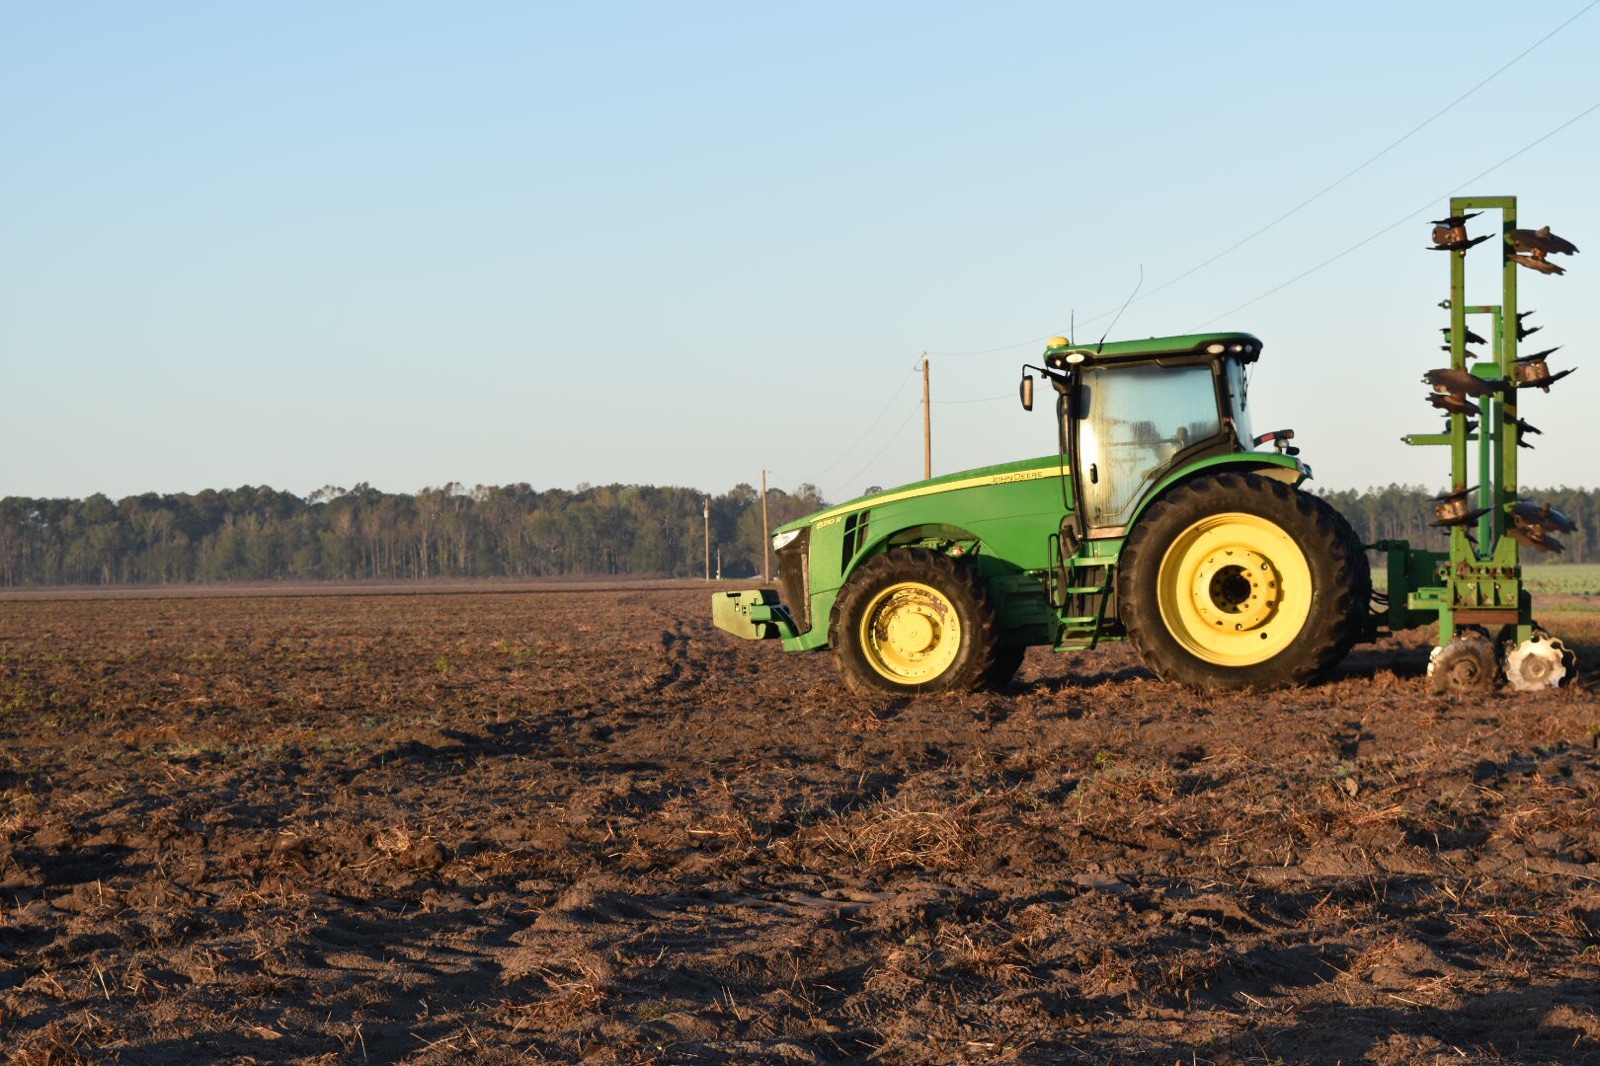  Rising operating costs have cost a lot of St. John's County farmers businesses, but Gin Barnes and Bryan Jones continue to fight the rising prices of operation, fight off the diseases to crops susceptible in Florida, and continue to make profit off 